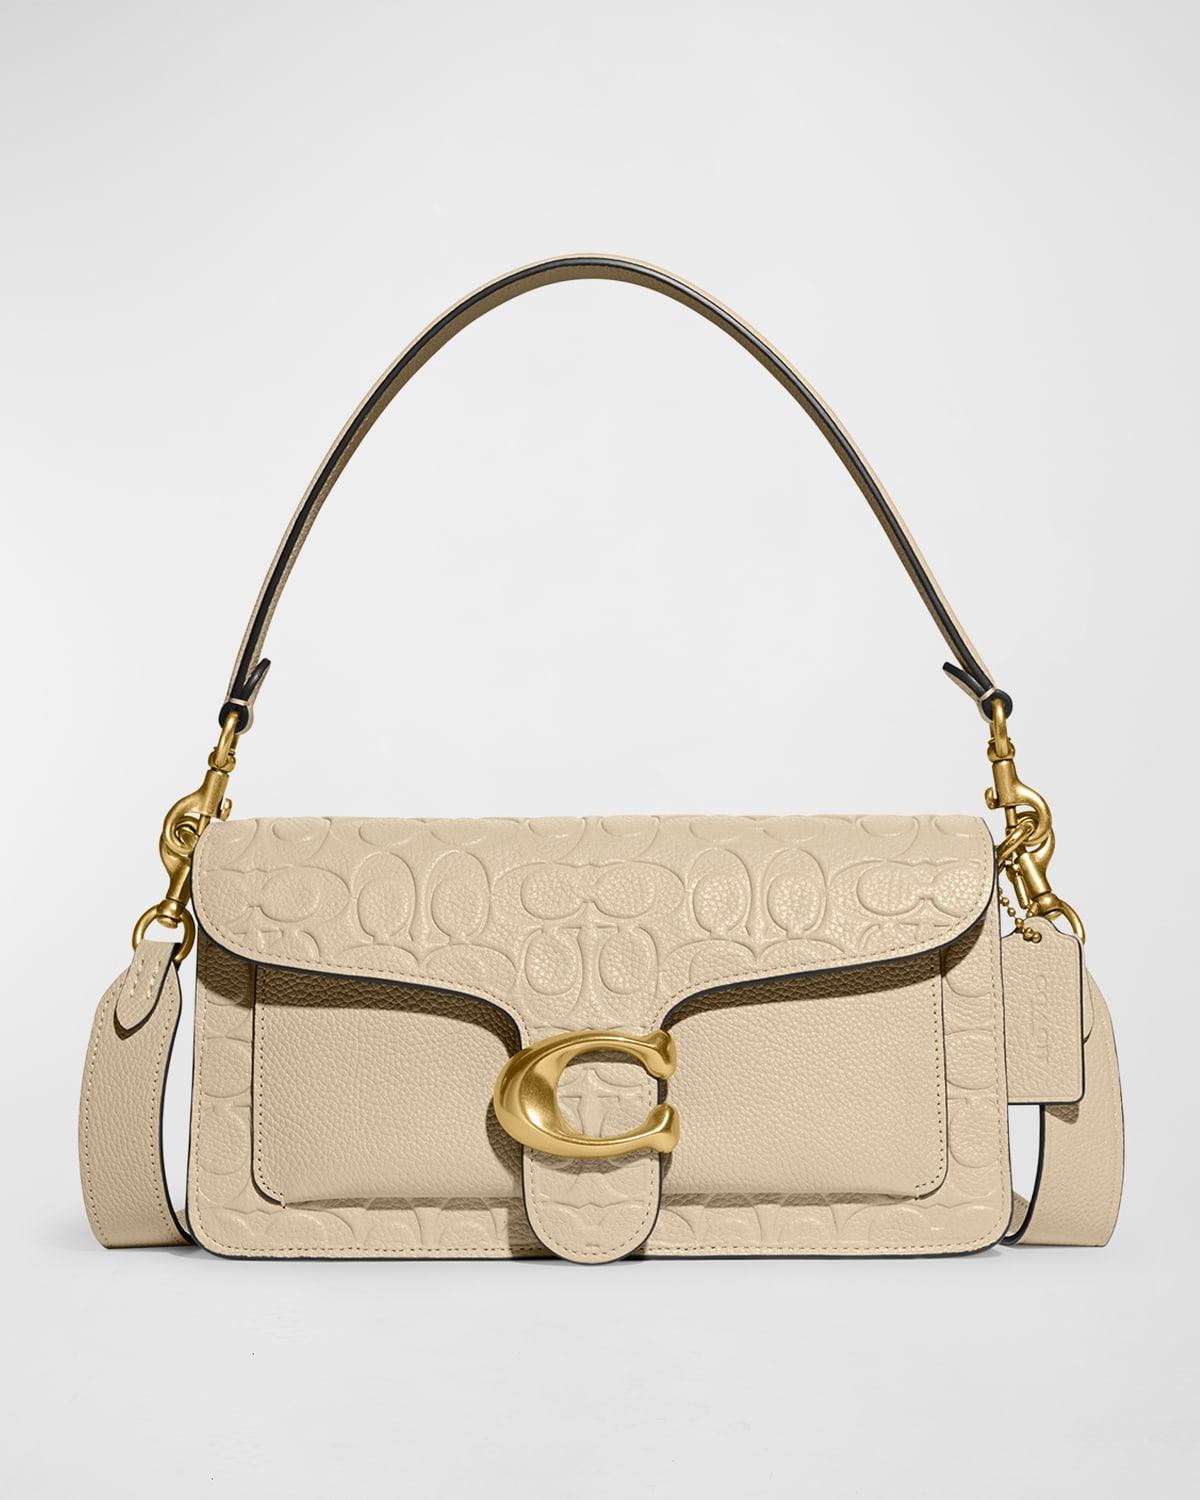 COACH Tabby Signature Leather Shoulder Bag in Natural | Lyst